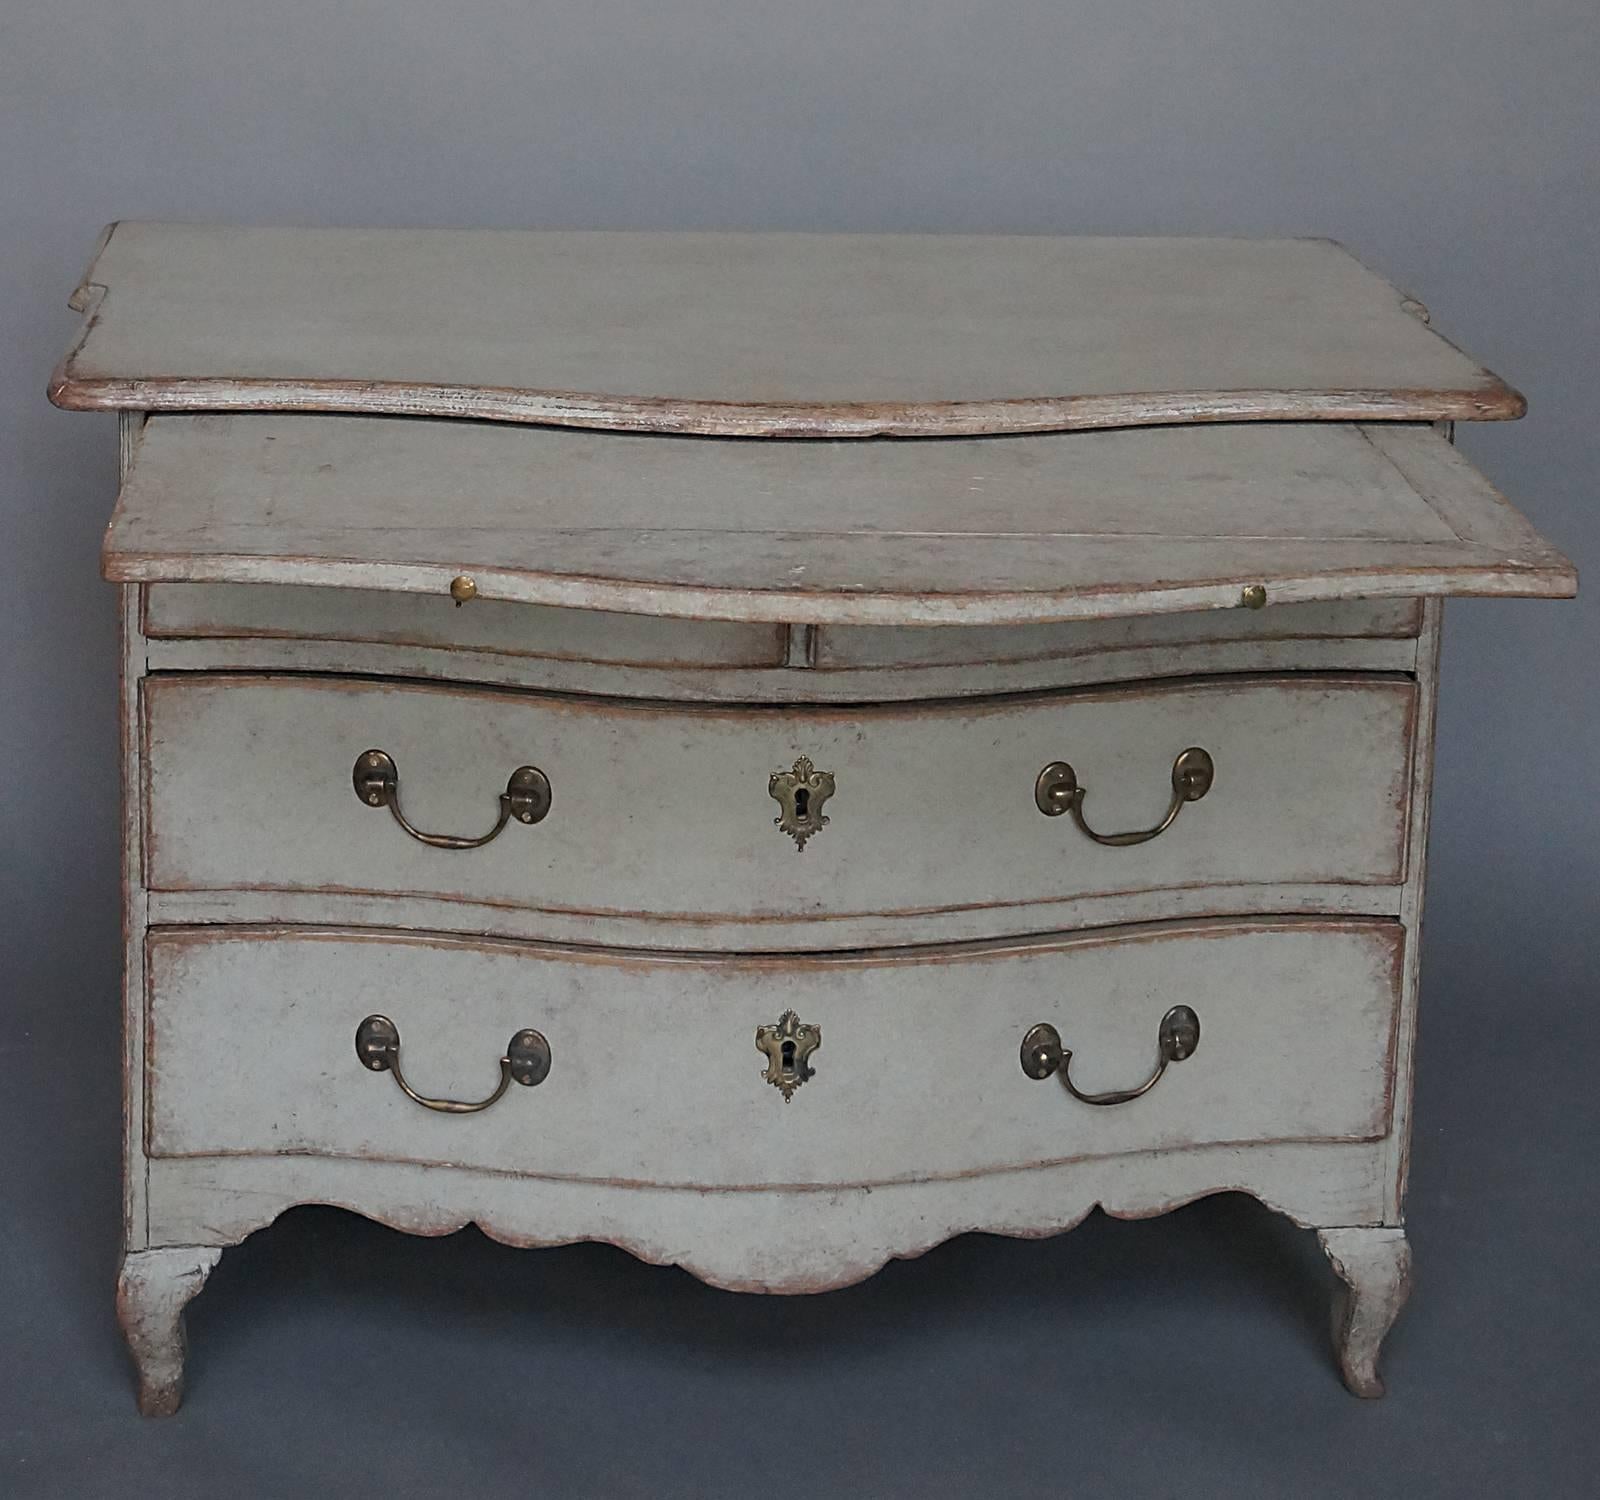 Period Baroque chest of drawers, Sweden, circa 1760, with a pull-out tray above the two over two drawers. Shaped top and ogee legs.